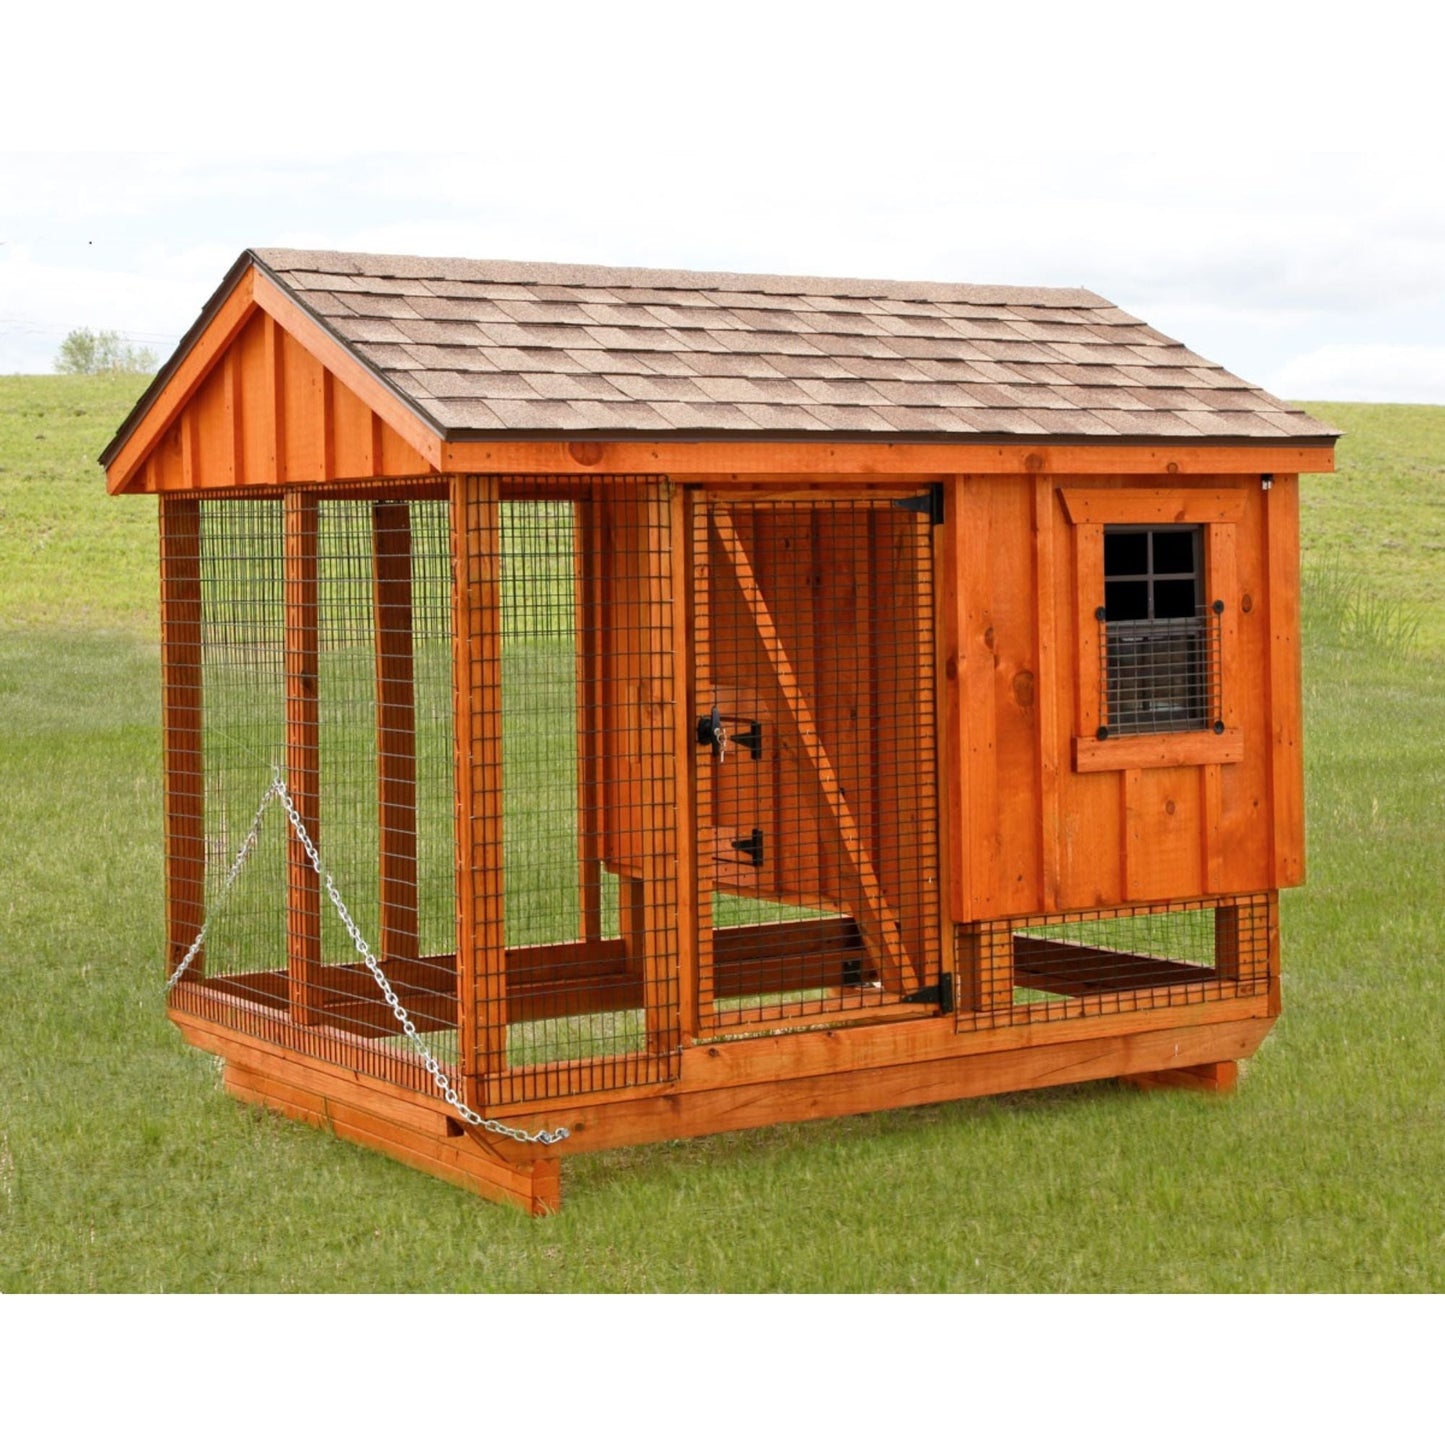 All-In-One 5x7 Chicken Coop plus Run (up to 9 chickens)